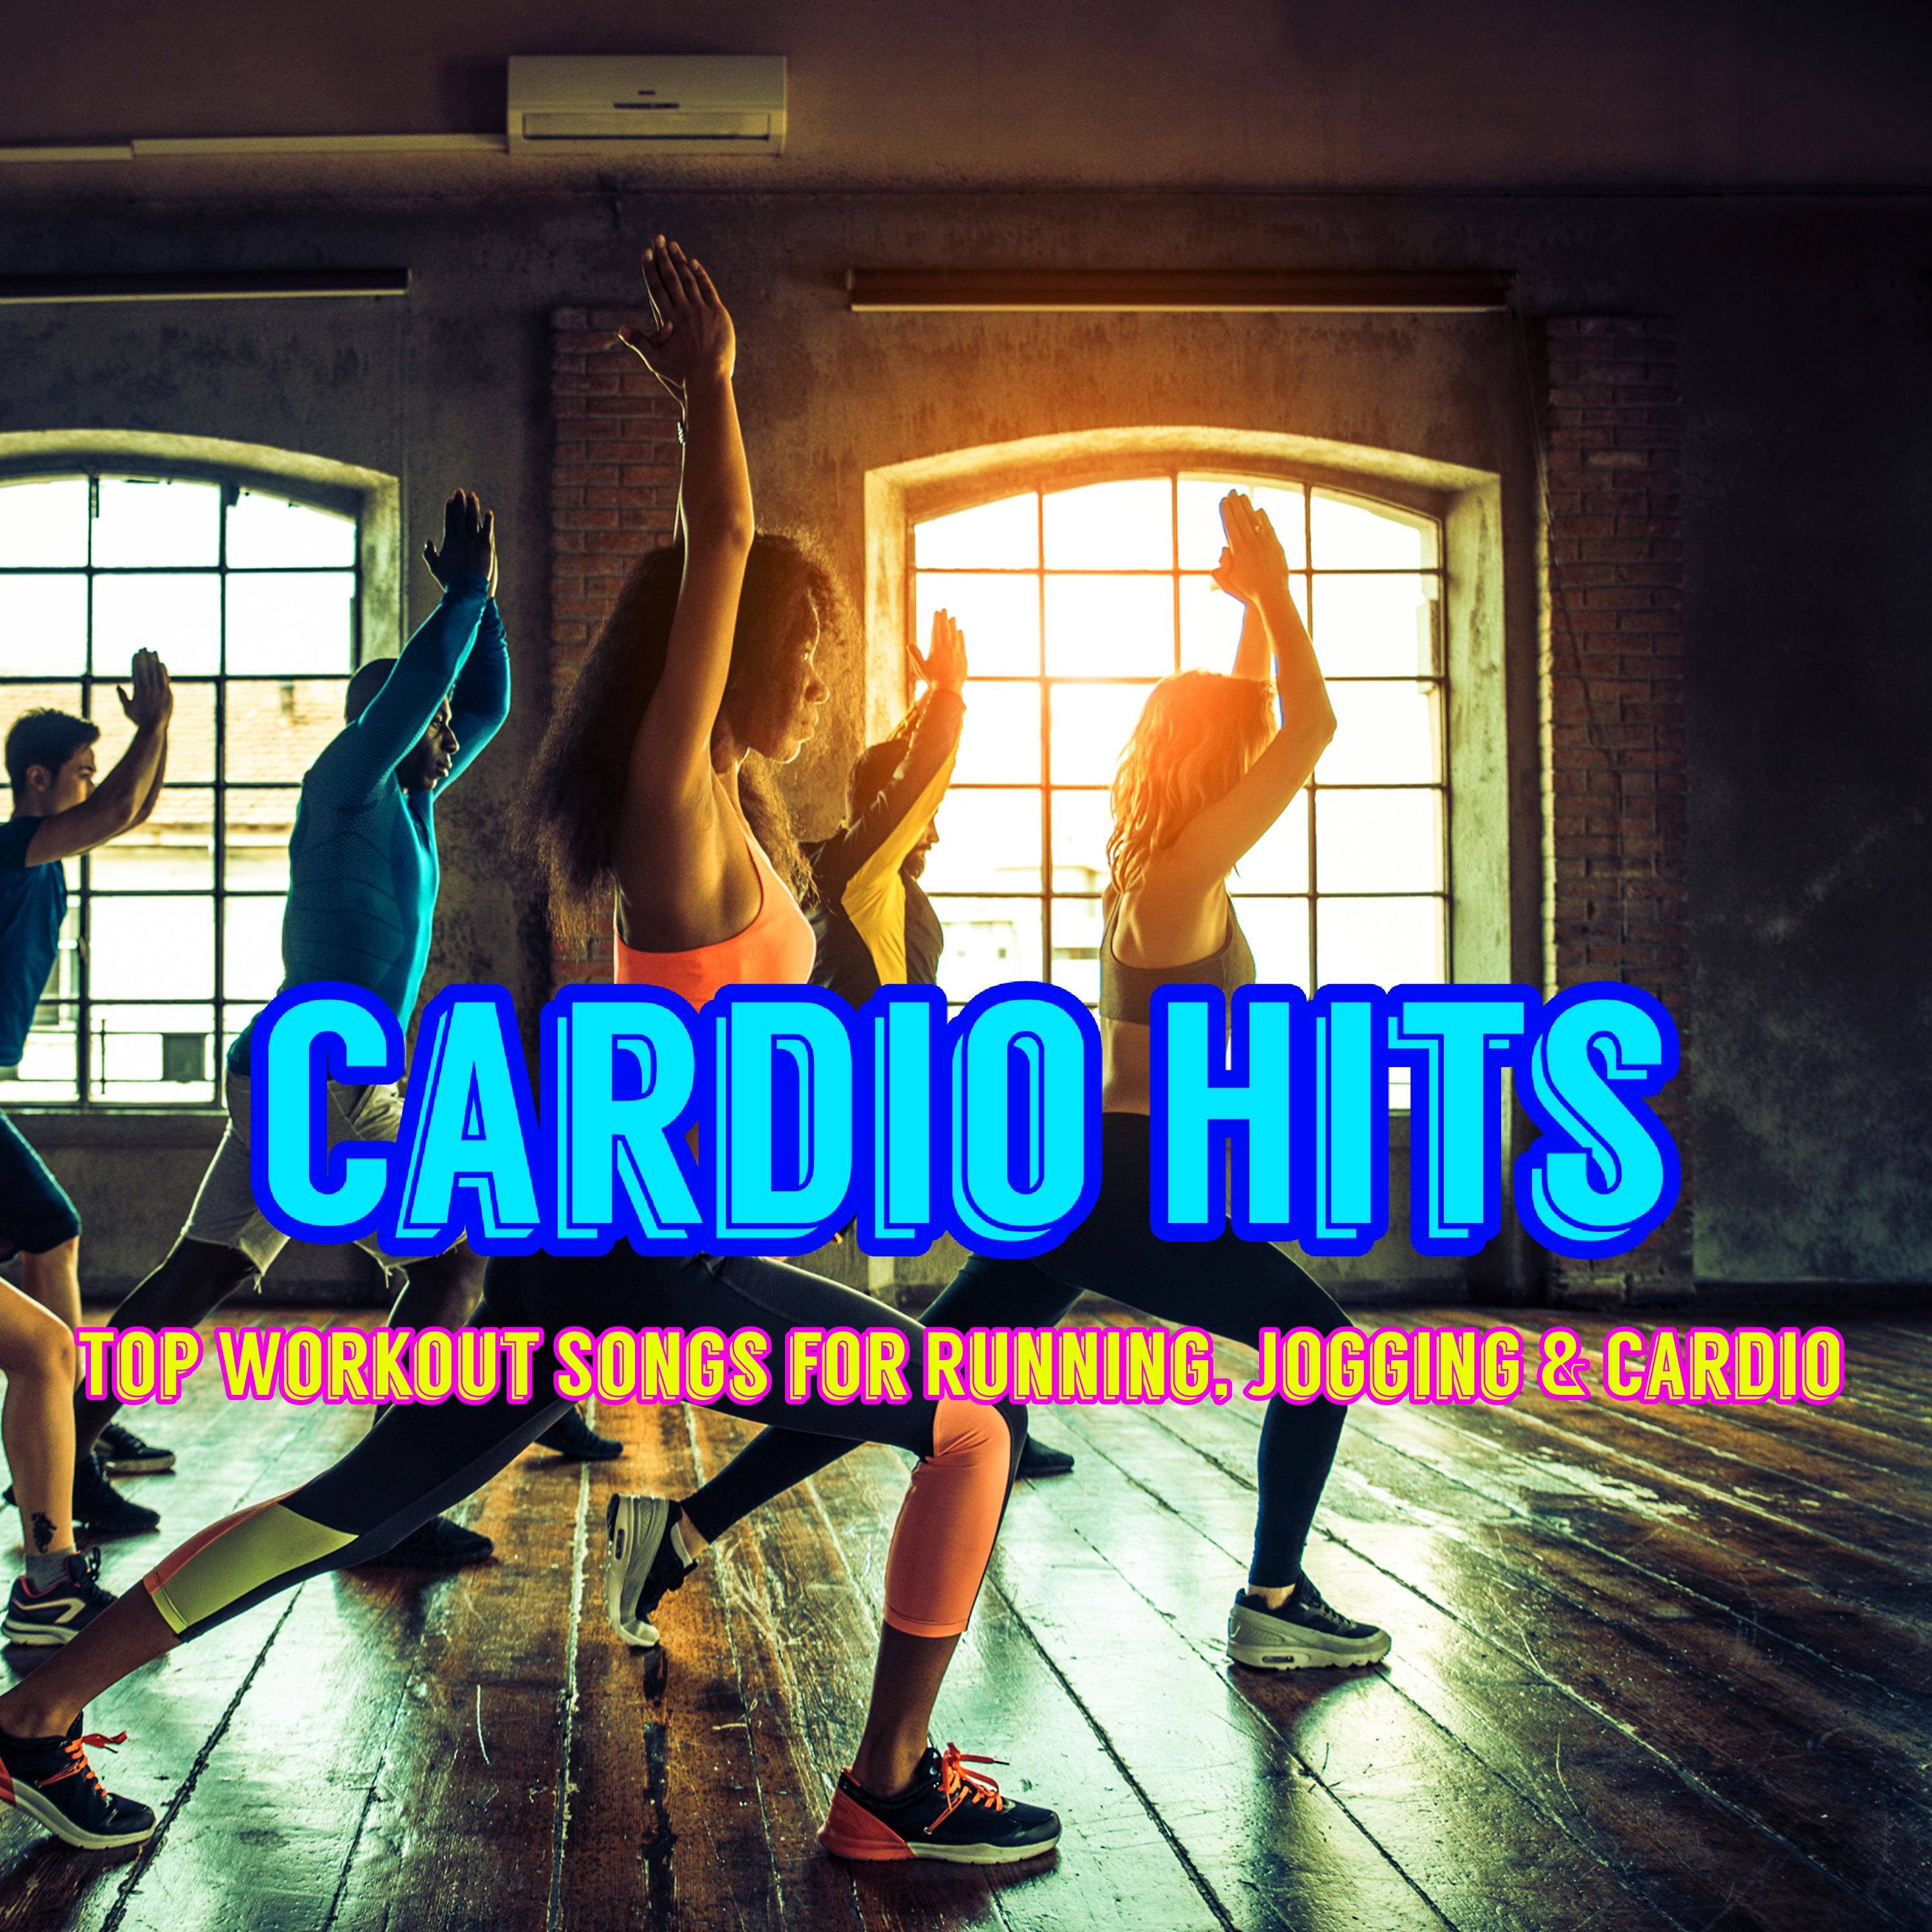 Cardio Hits  Top Workout Songs for Running, Jogging  Cardio